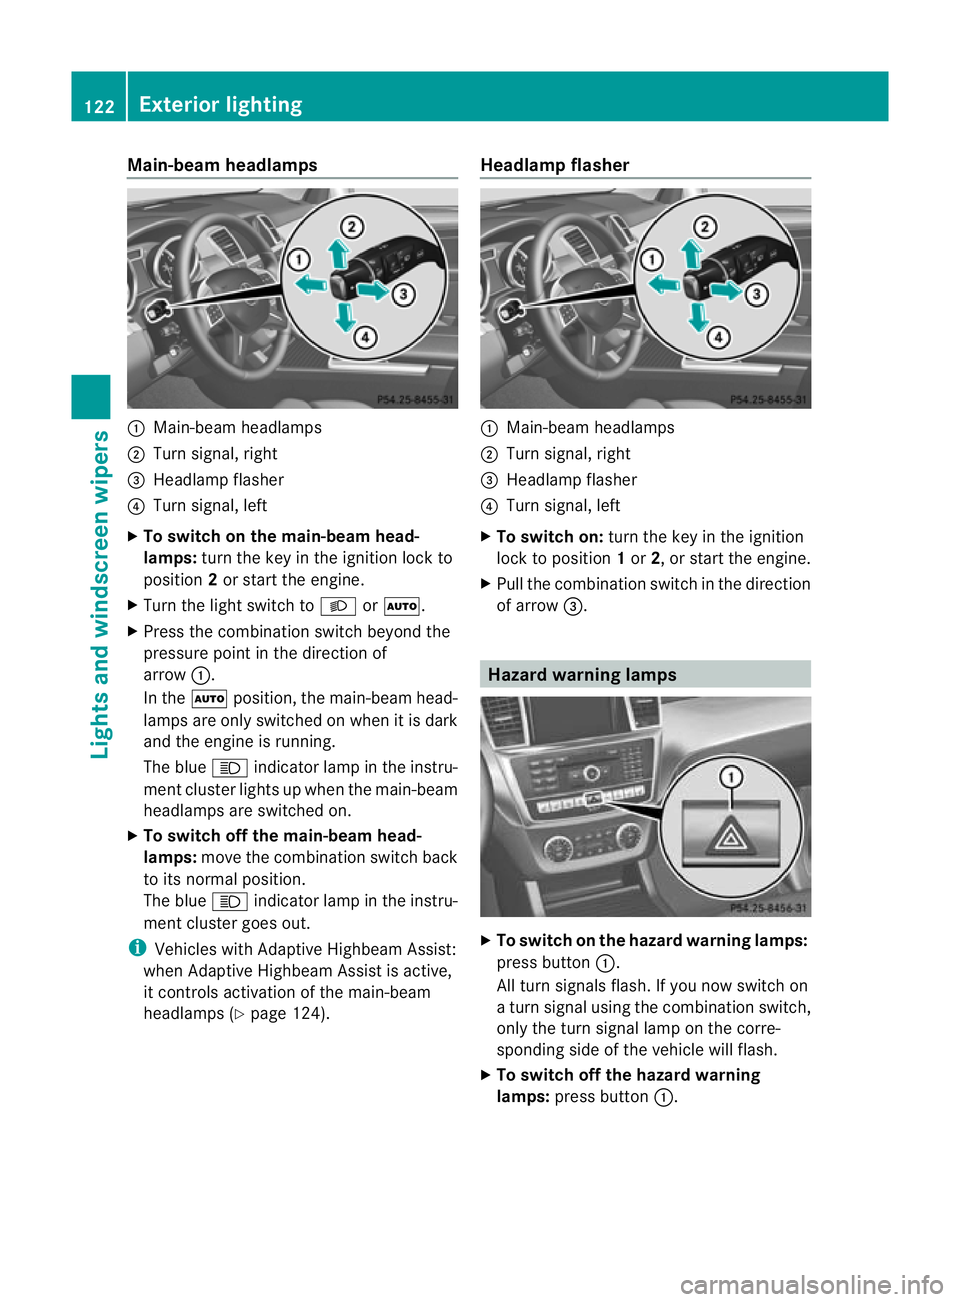 MERCEDES-BENZ GL SUV 2012  Owners Manual Main-beam headlamps
:
Main-beam headlamps
; Turn signal, right
= Headlam pflasher
? Turn signal, left
X To switch on the main-beam head-
lamps: turn the key in the ignitio nlock to
position 2or star t